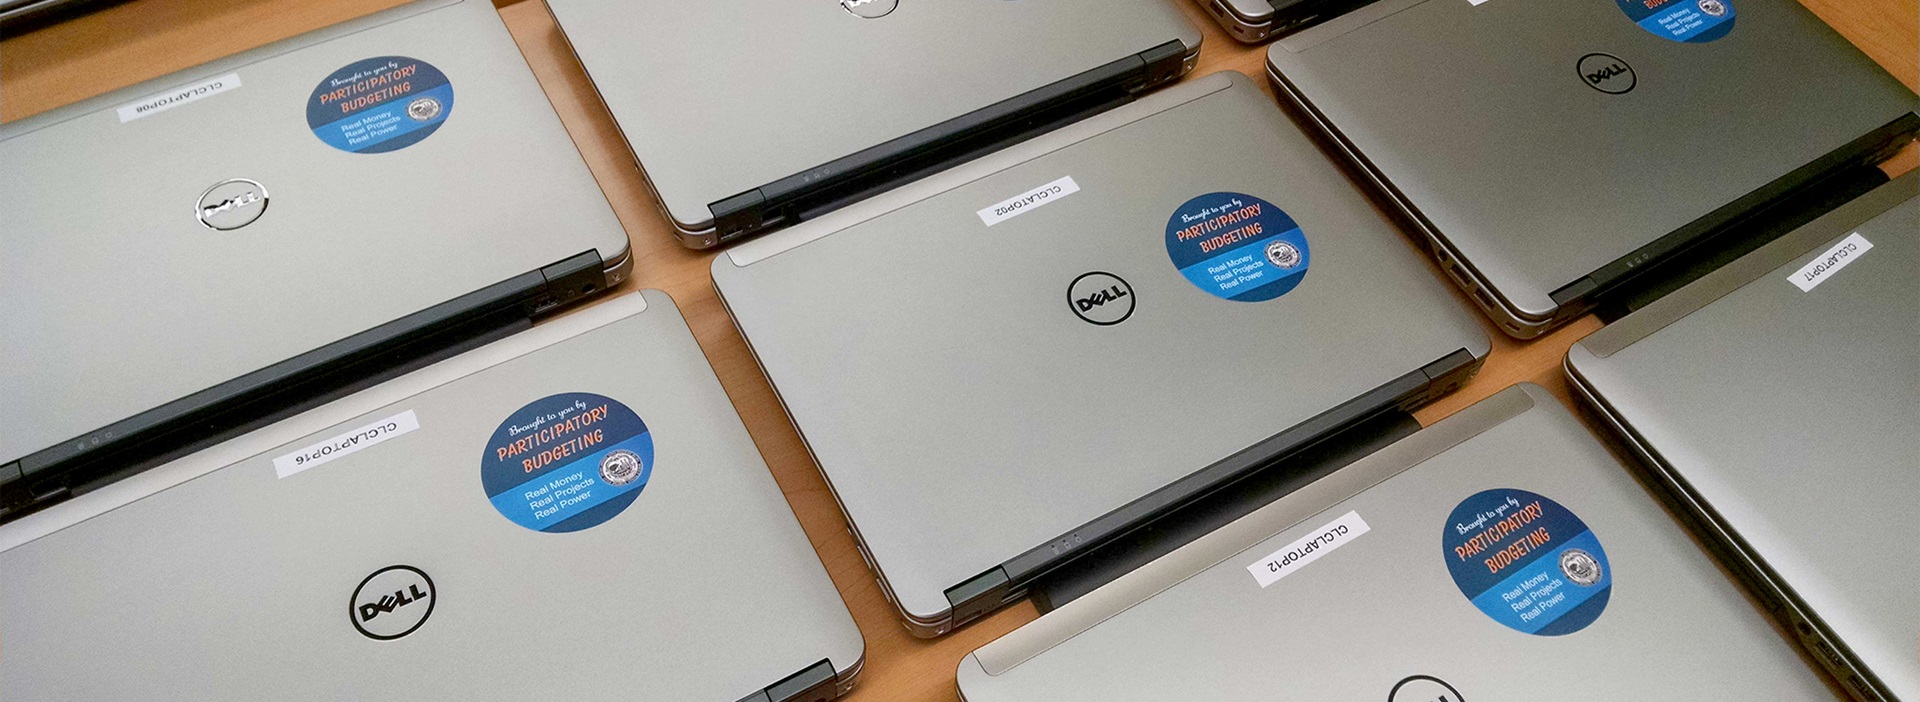 Photo of laptops purchased with Participatory Budgeting funds